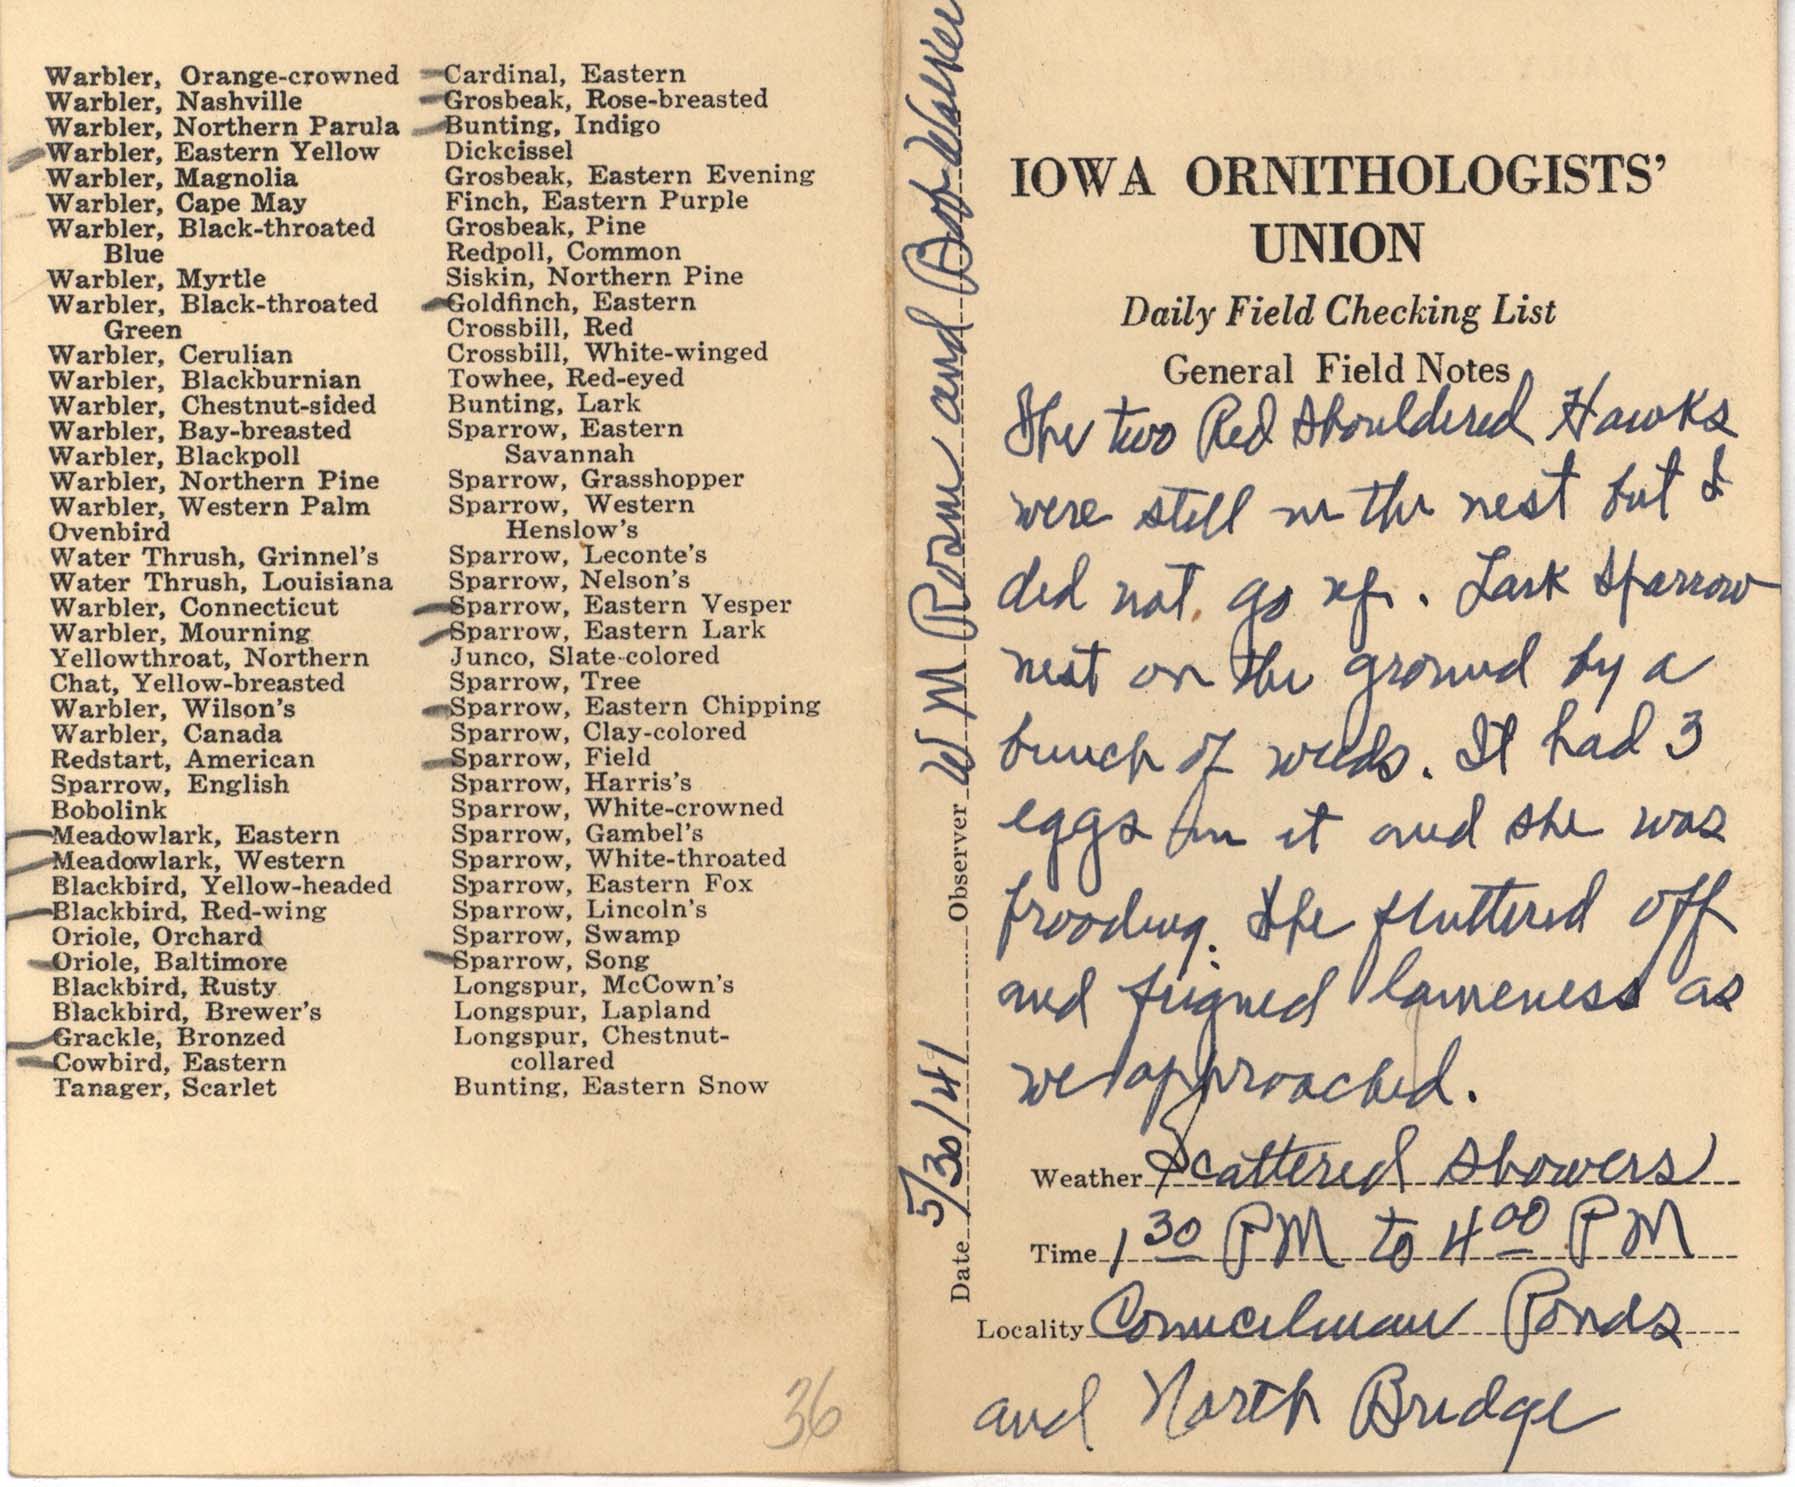 Daily field checking list by Walter Rosene, May 30, 1941